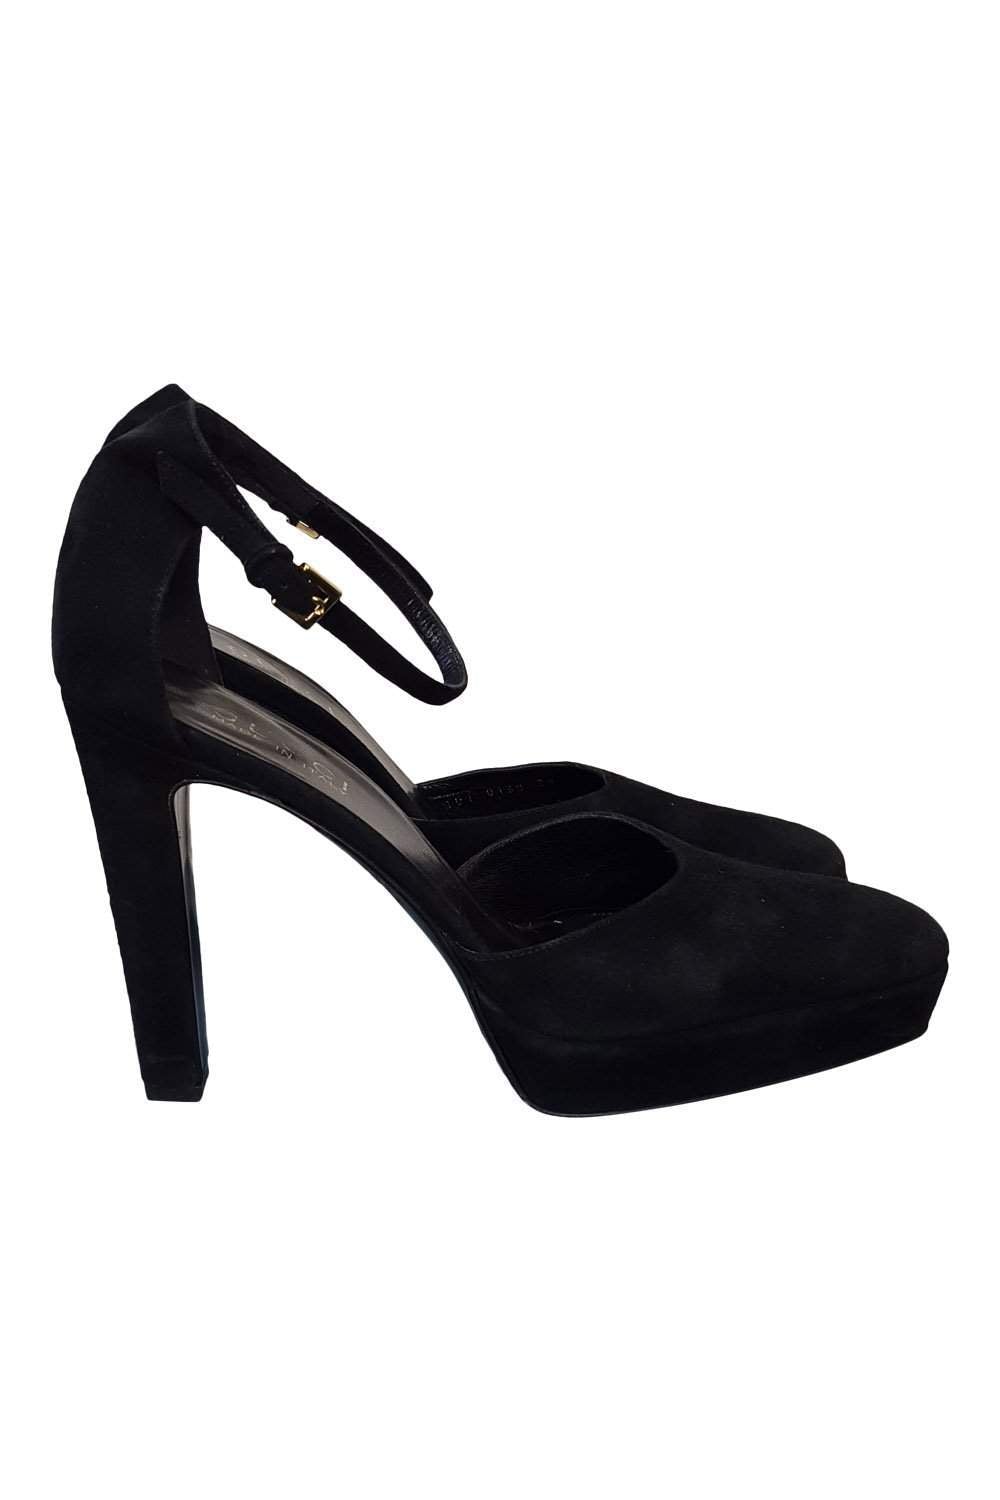 GUCCI Black Suede Ankle Strap Platform Heels (39.5 C)-Gucci-The Freperie